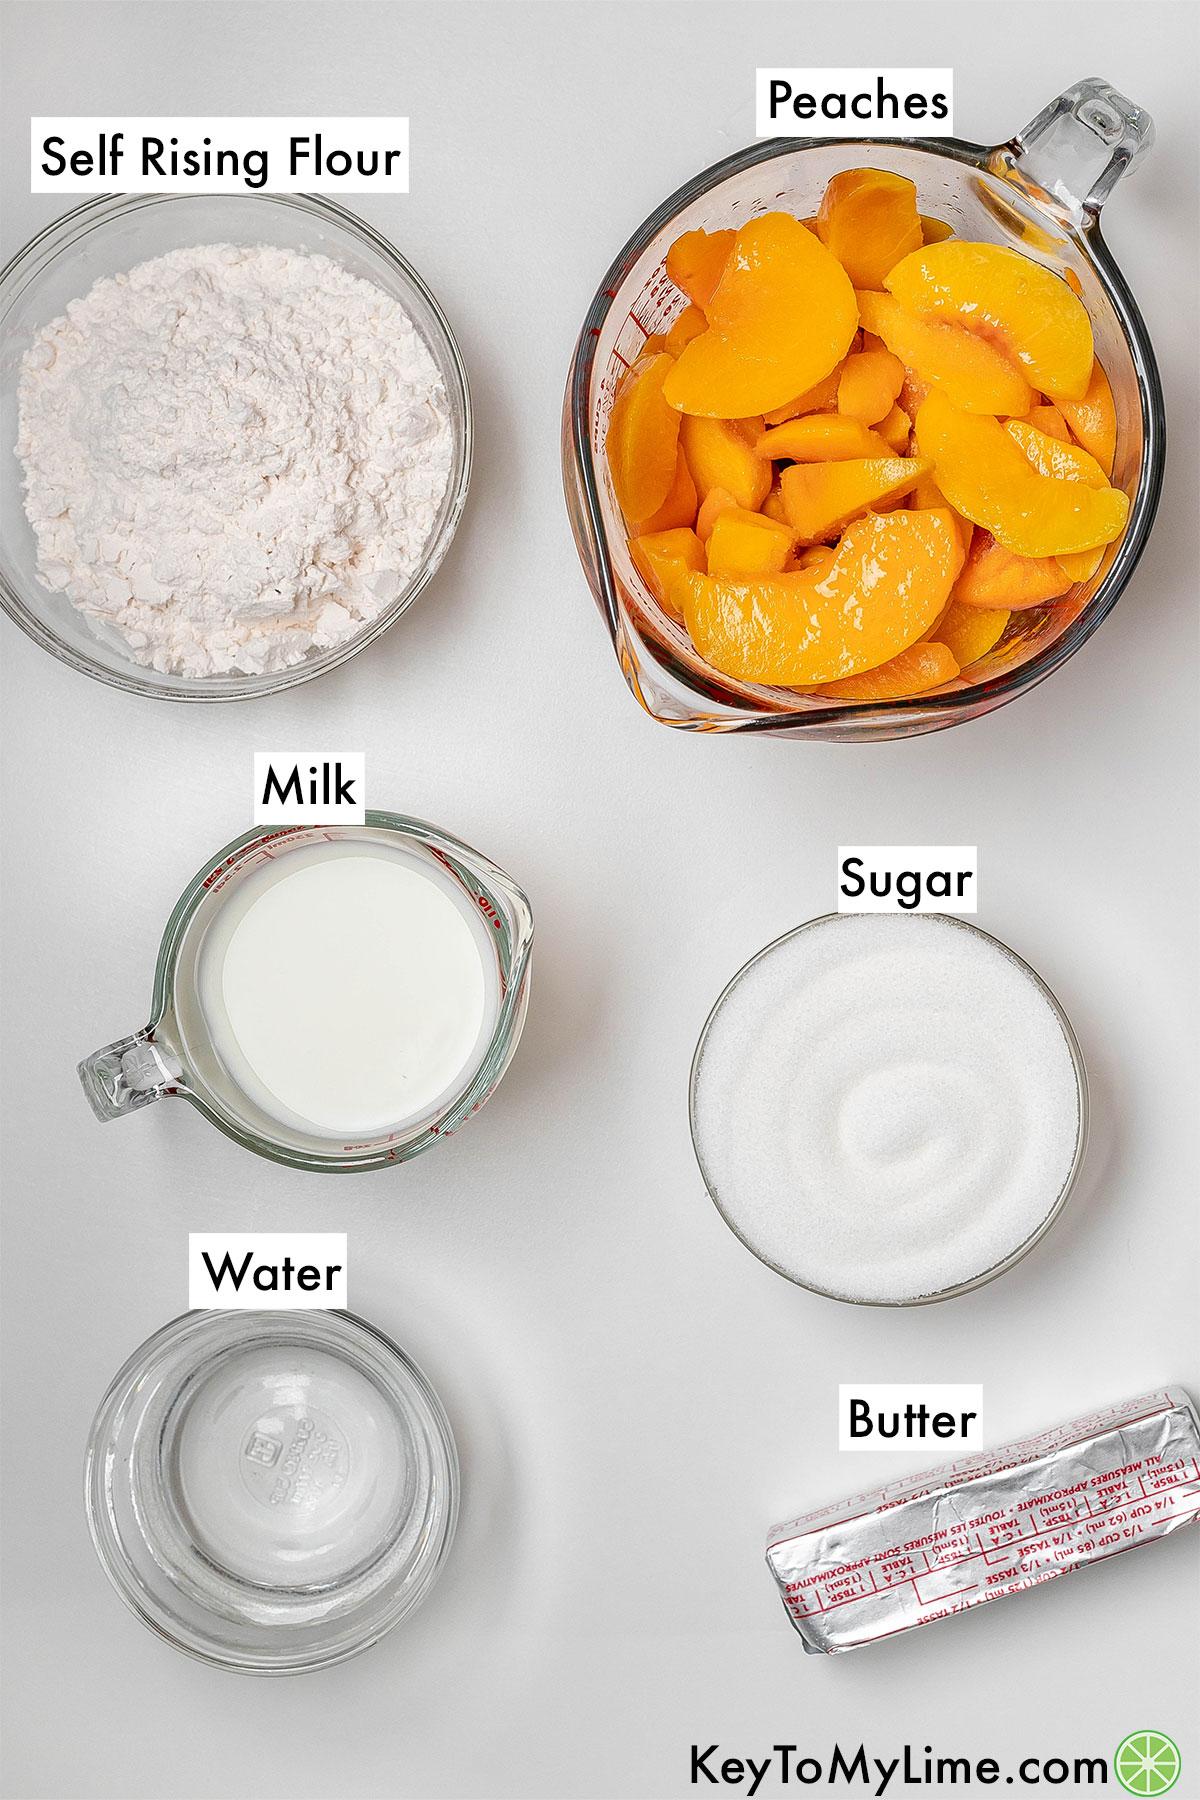 The labeled ingredients for Paula Deen peach cobbler.